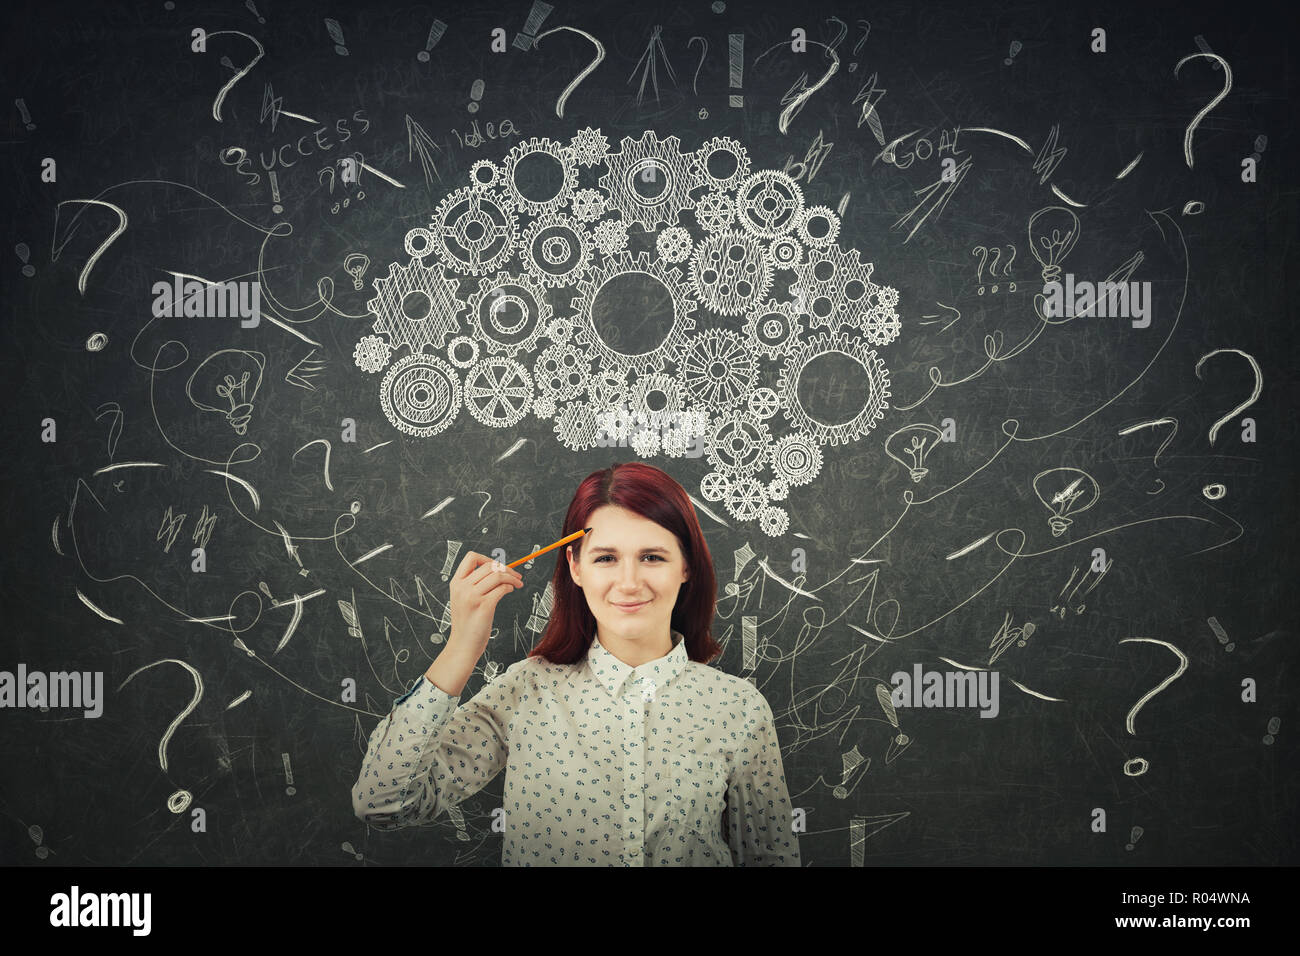 Puzzled businesswoman having questions in front of a blackboard. Big chalk drawn gear brain above head, positive thinking mess as thoughts. Concept fo Stock Photo